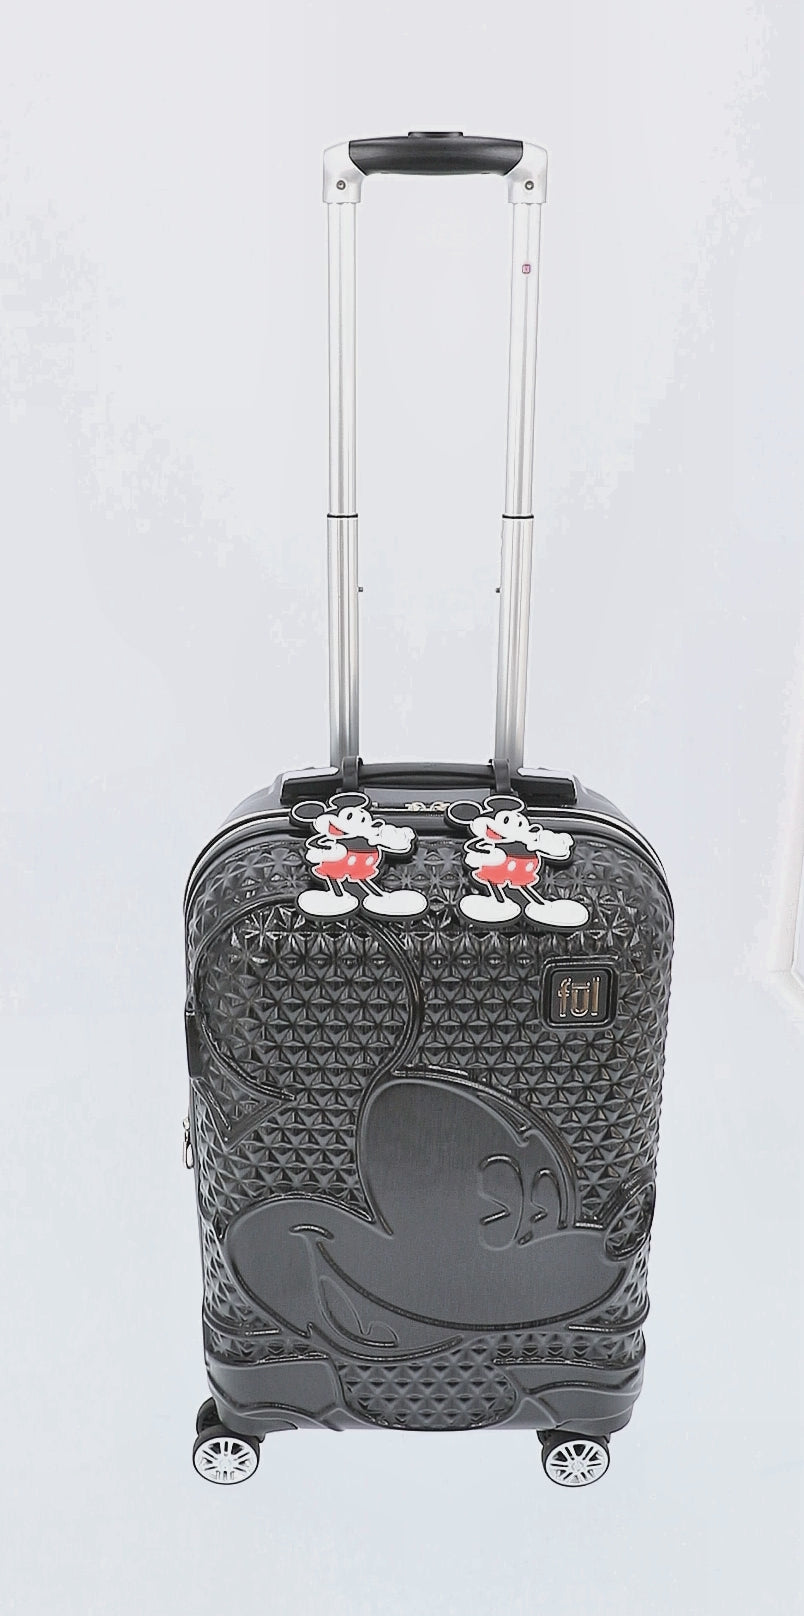 Black Disney Mickey Mouse textured raised shape 22.5" carry-on hardside spinner suitcase luggage with ID tags - best traveling suitcases for adults